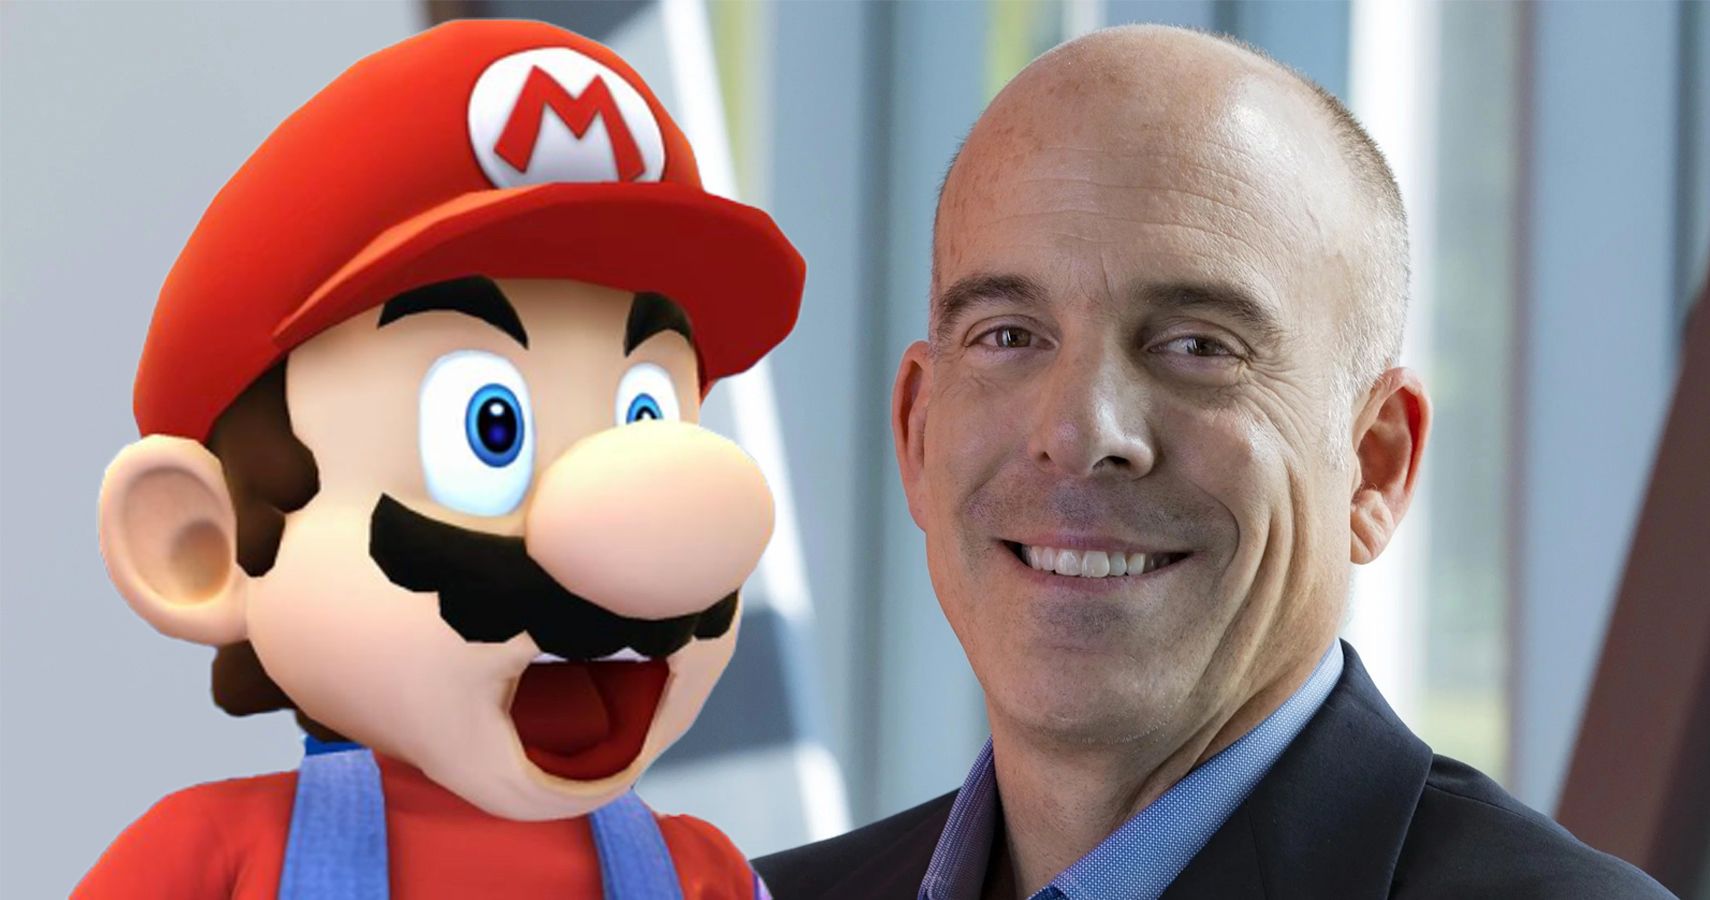 Nintendo Executive Doug Bowser Reveals His Favorite Video Game (And Its Not From Nintendo)